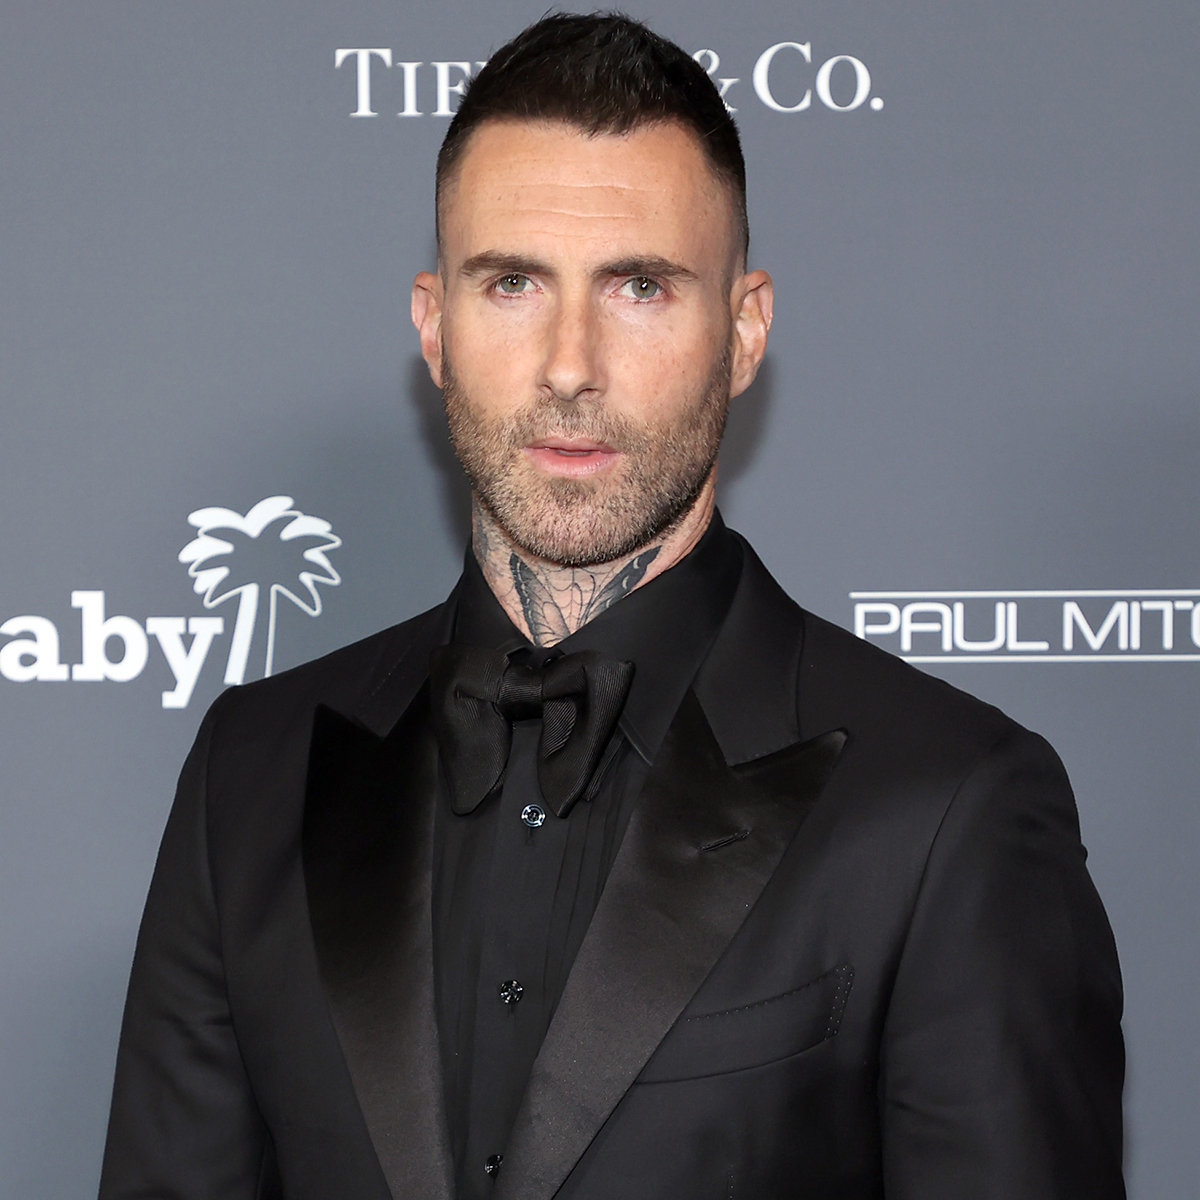 Why Adam Levine is Returning to The Voice 4 Years After Exit